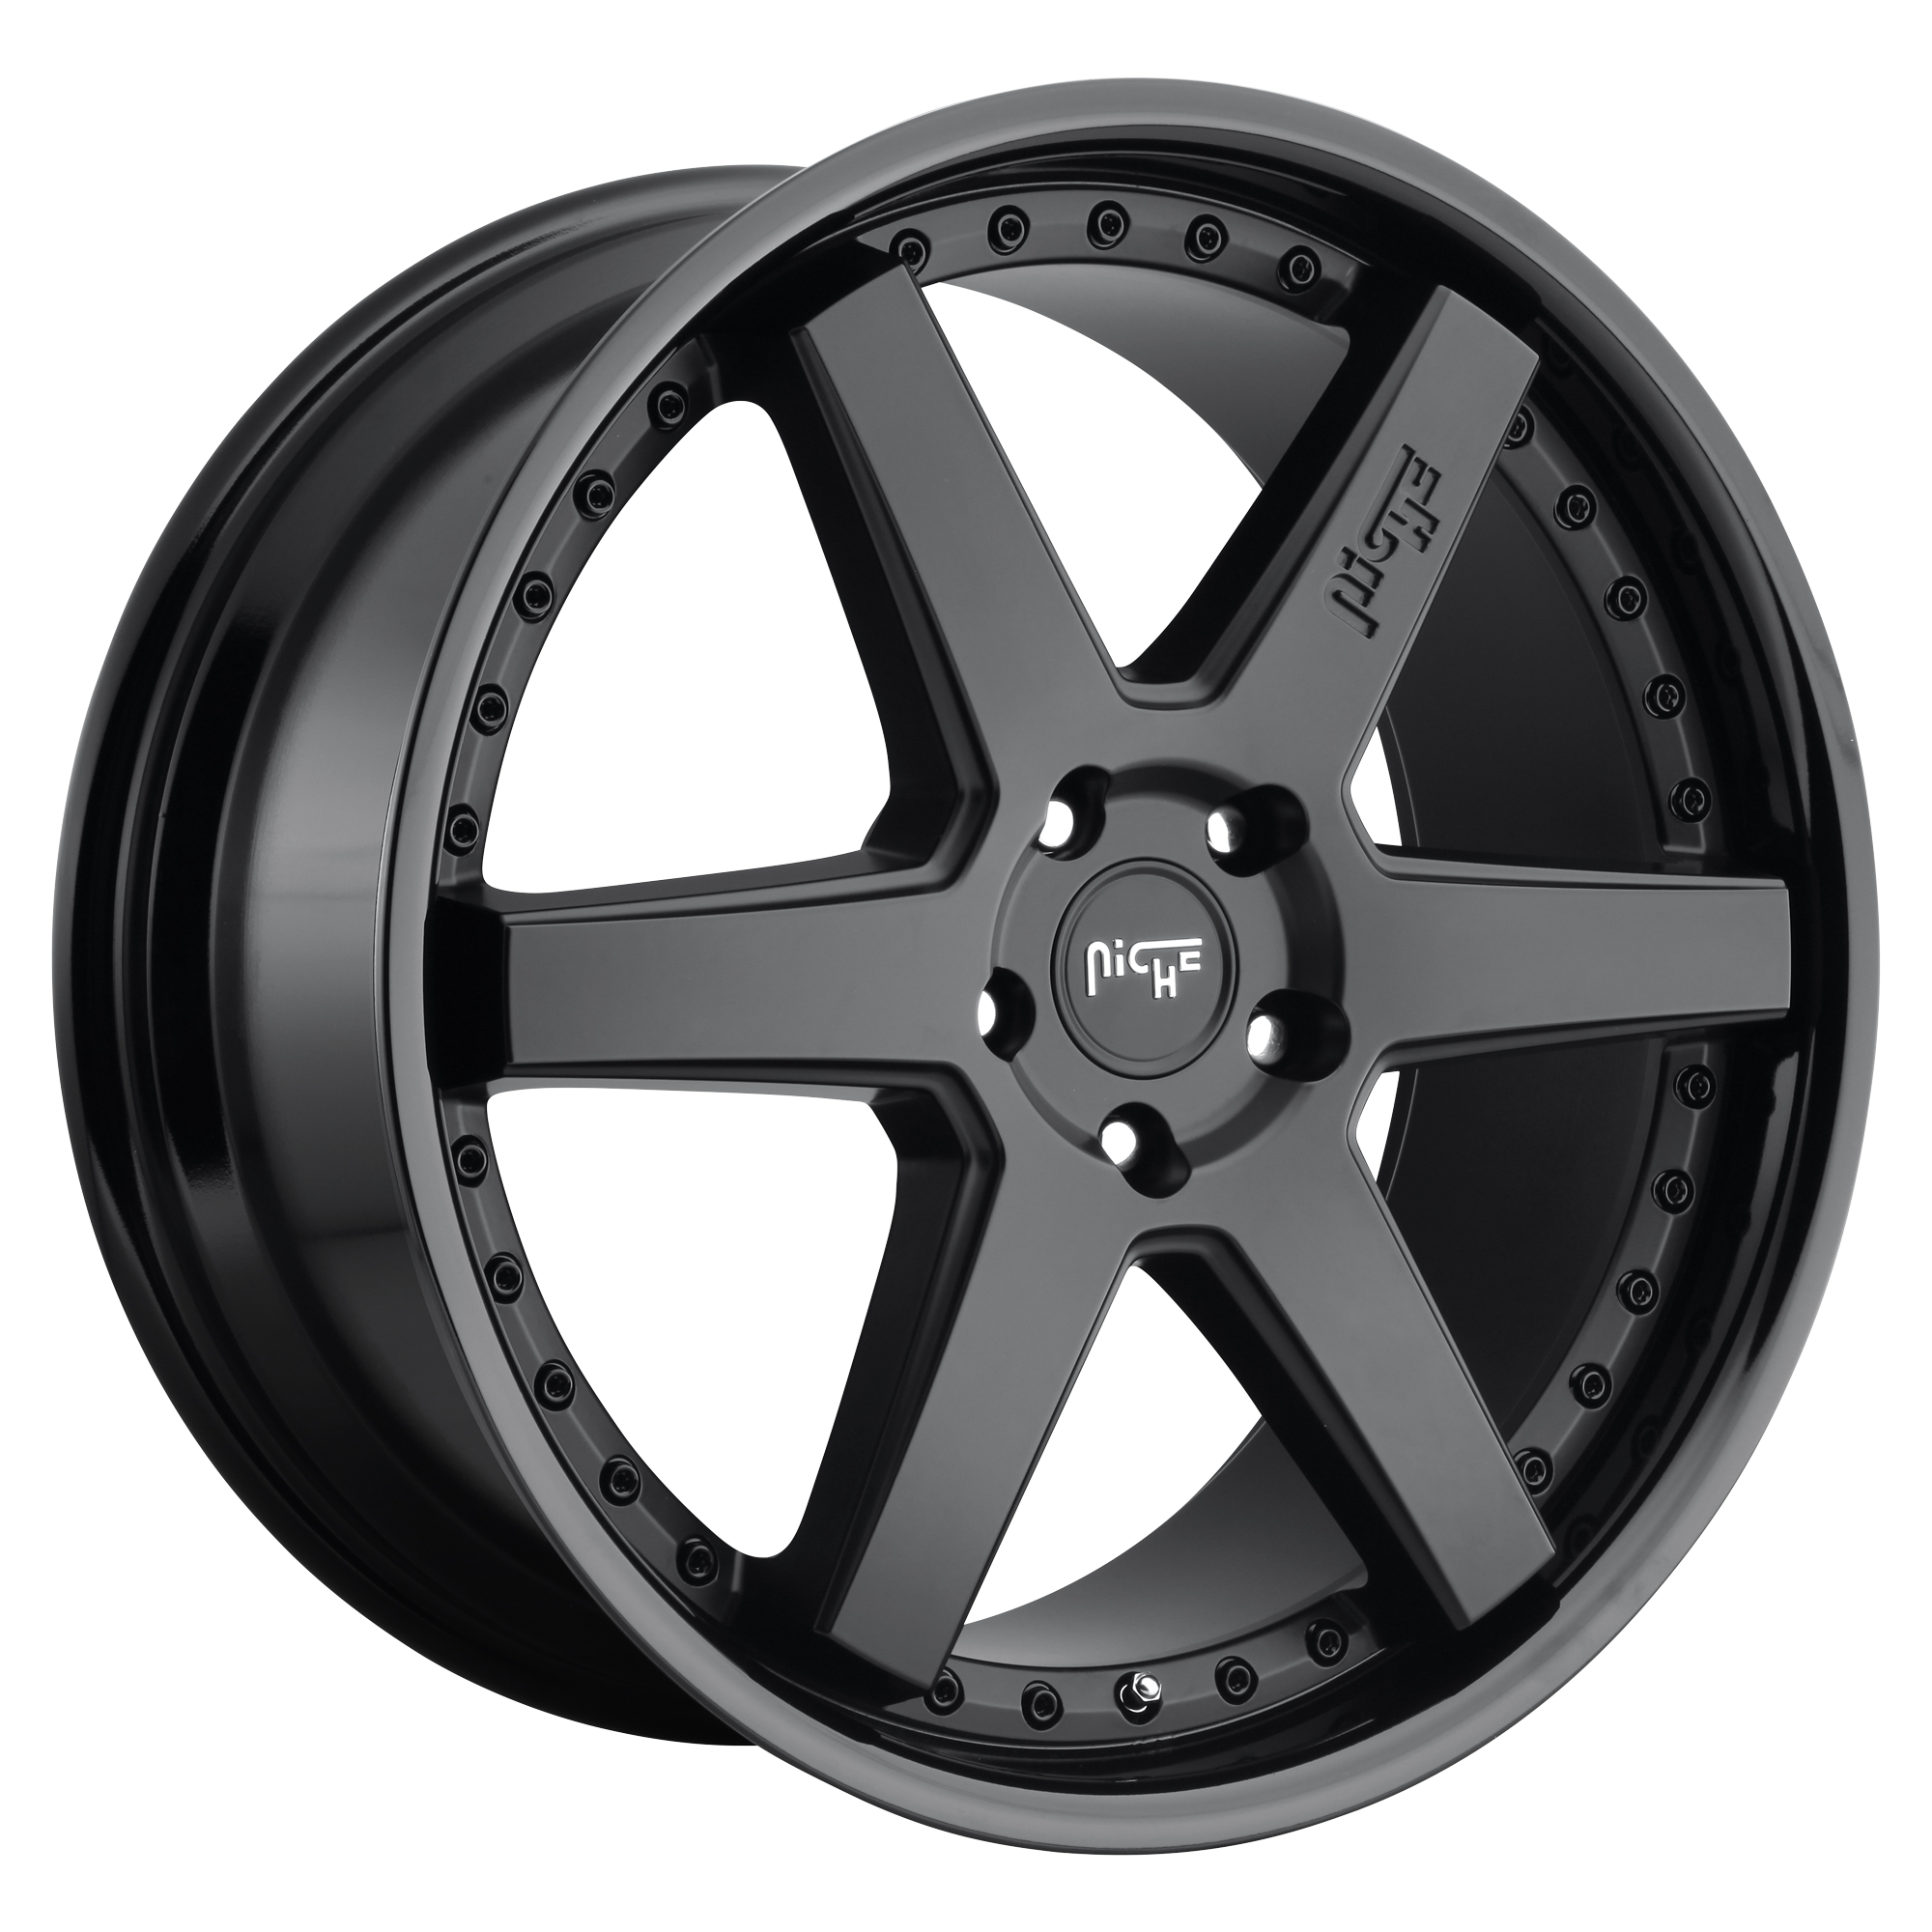 ALTAIR 20x9 5x114.30 GLOSS BLACK MATTE BLACK (25 mm) - Tires and Engine Performance